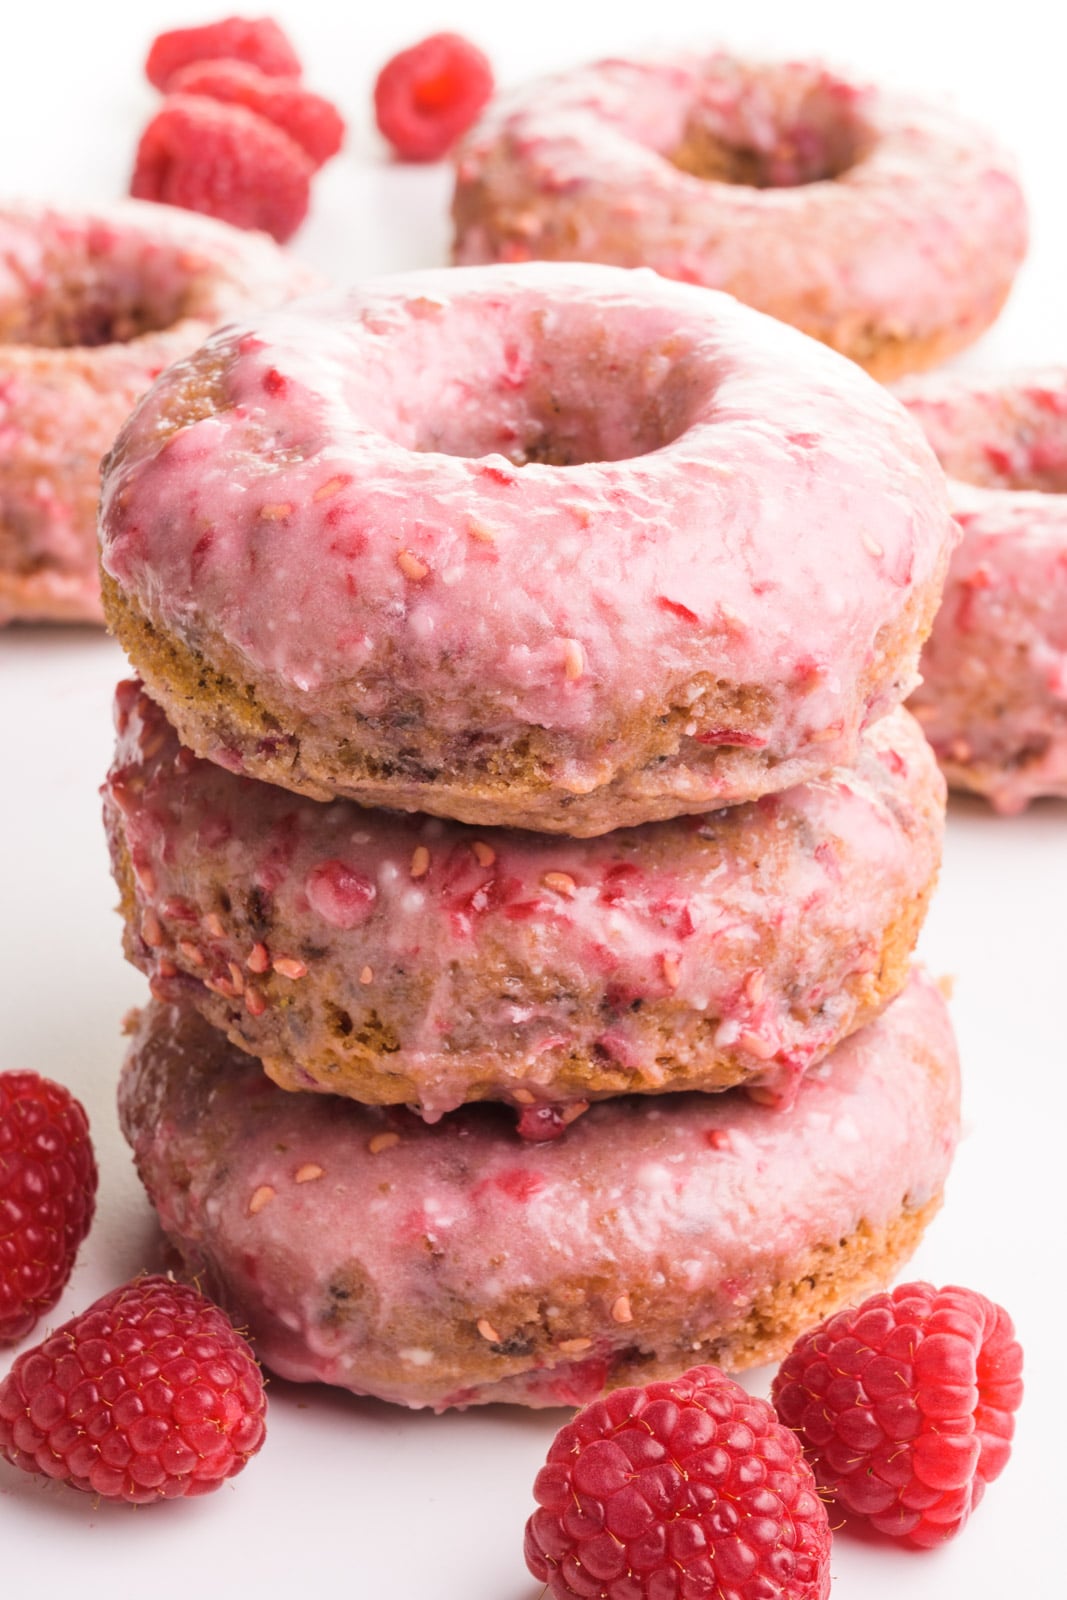 A stack of three donuts has fresh raspberries and more donuts around it and in the background.